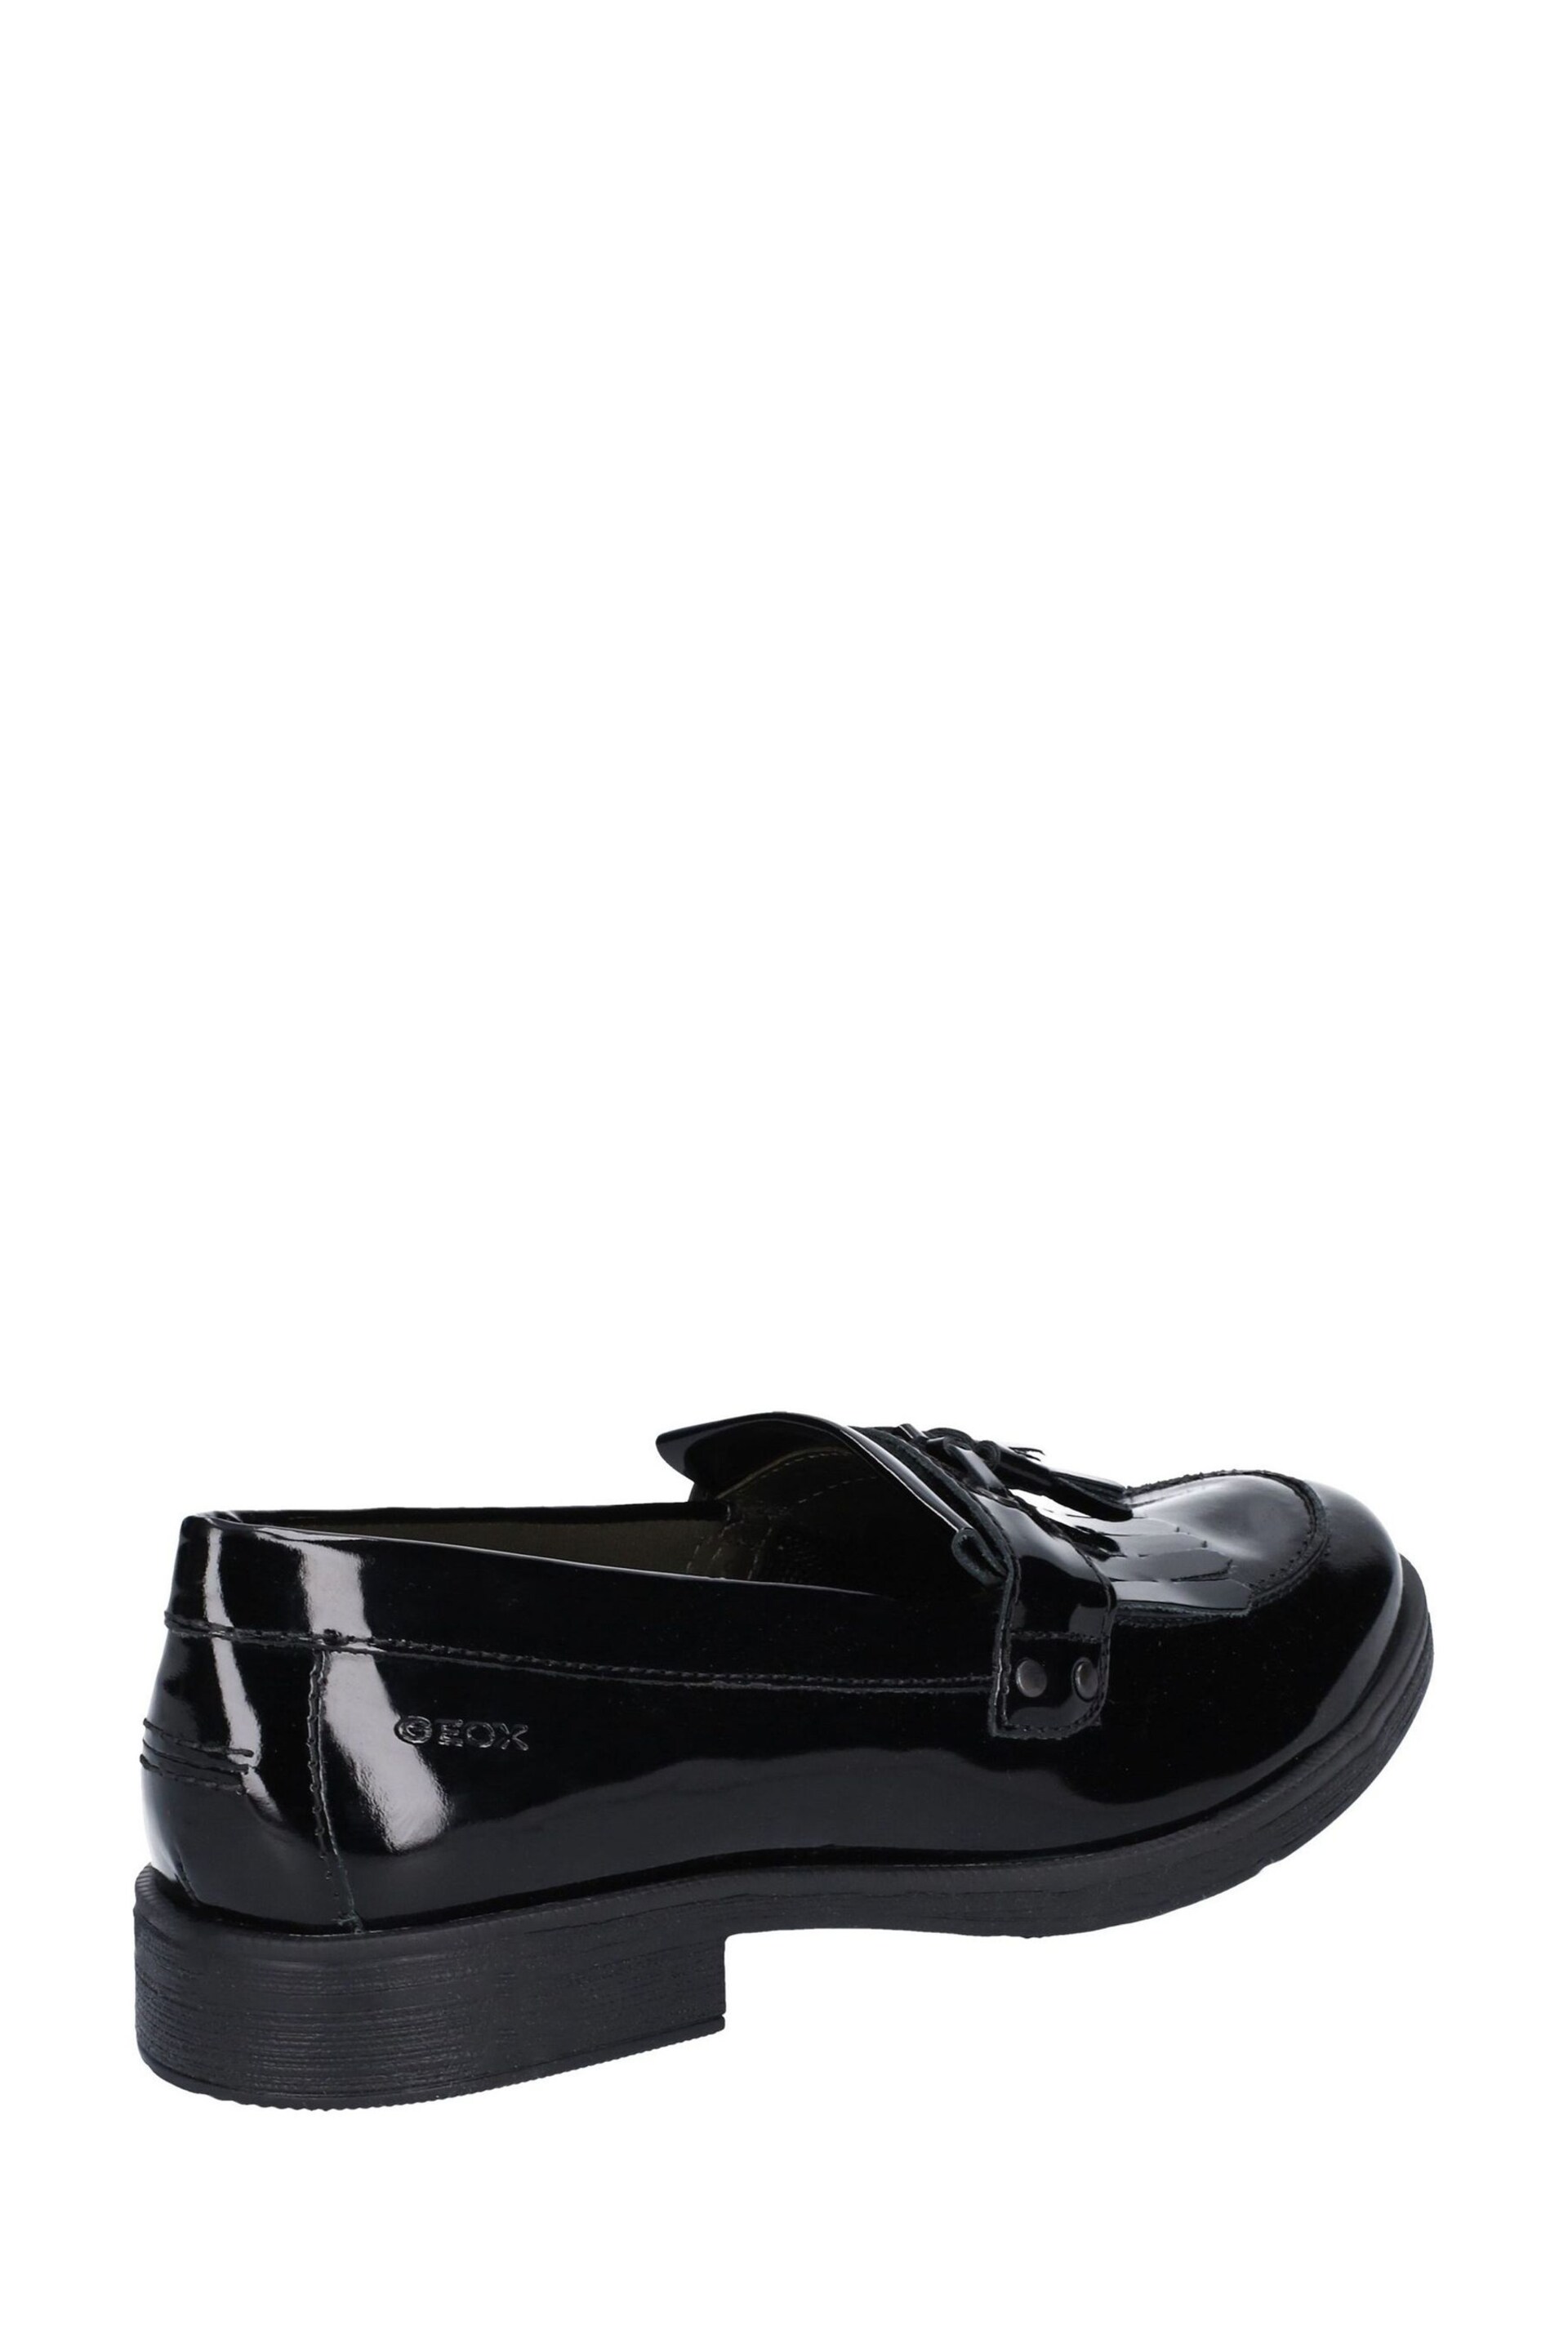 Geox Junior Girl's Agata Black Shoes - Image 2 of 4